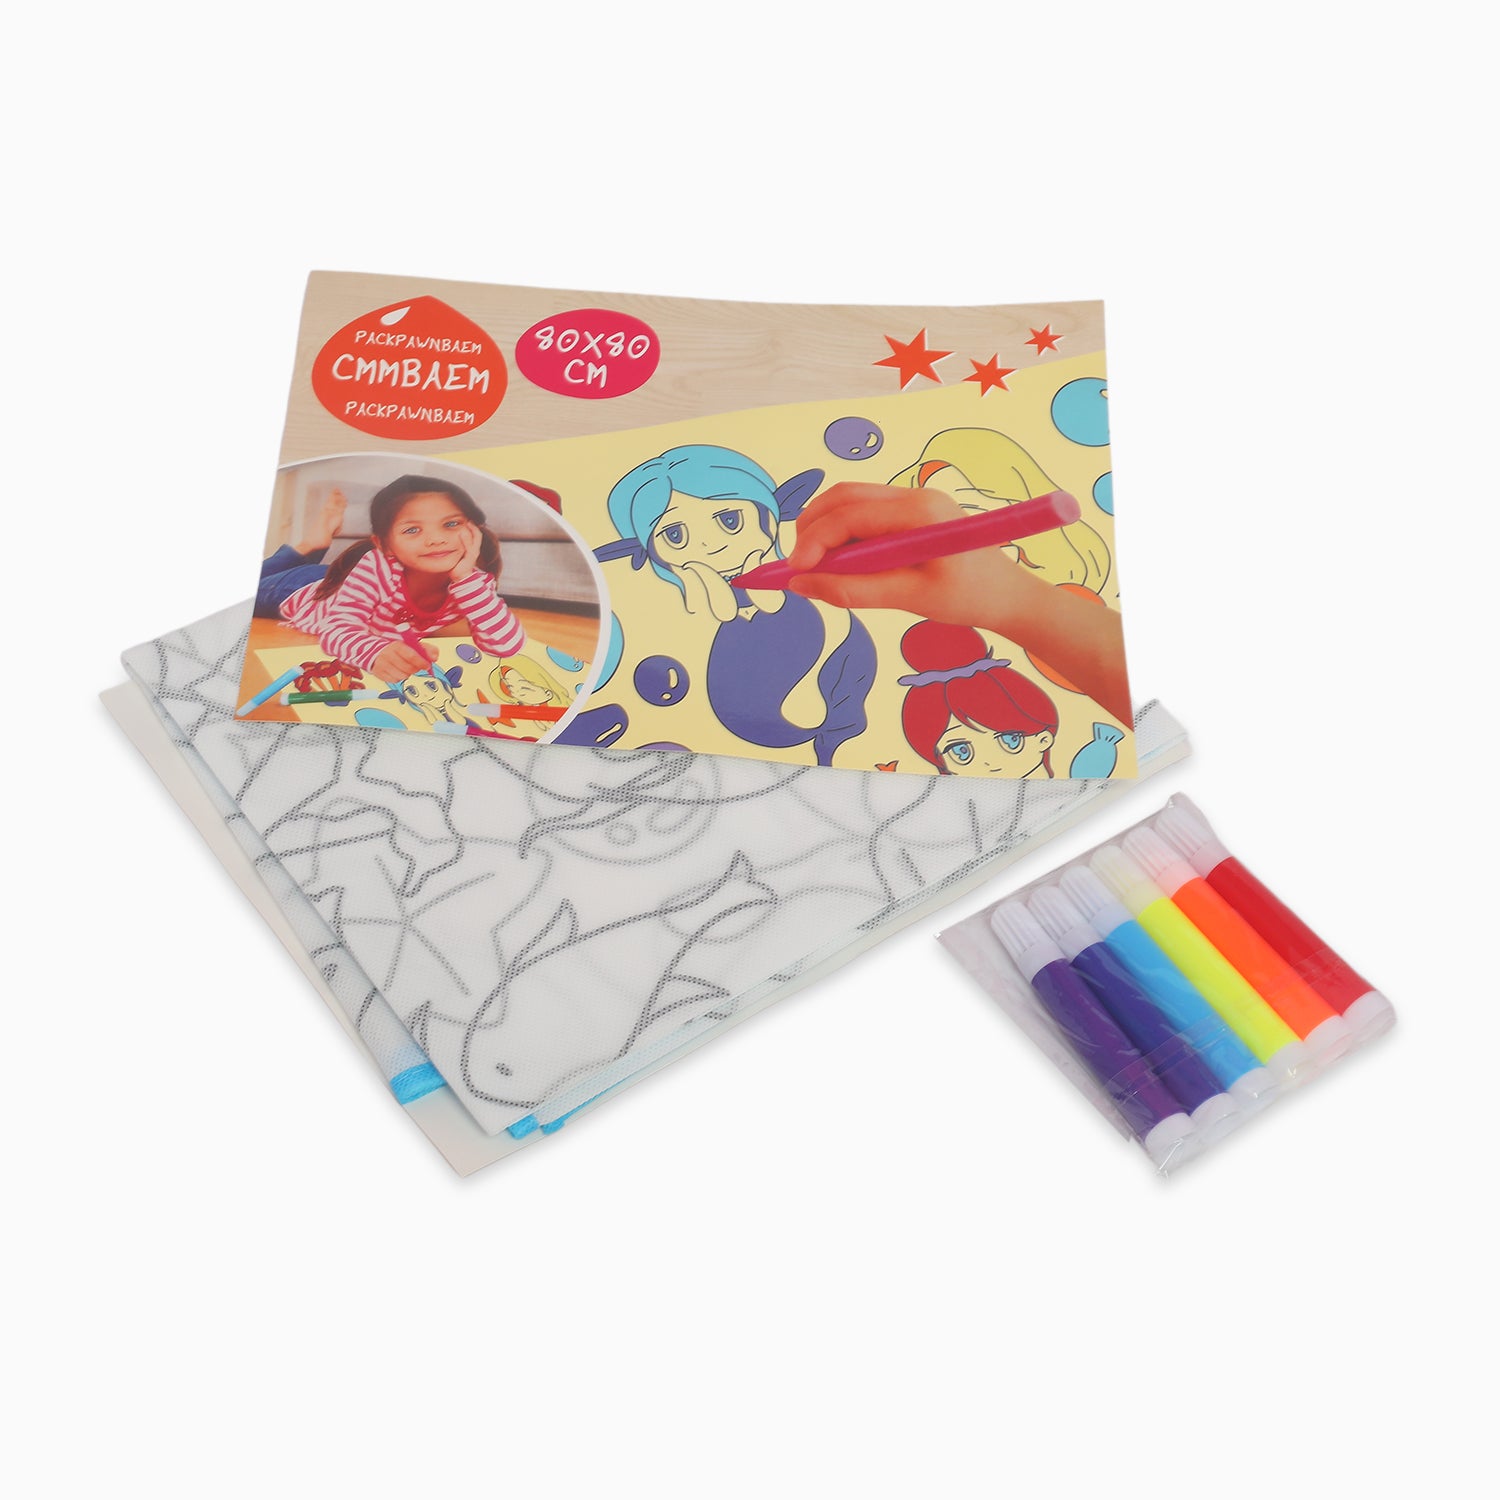 ZORSE Mermaid reusable washable coloring mat for your kids 80 x 80cm with sketch pens